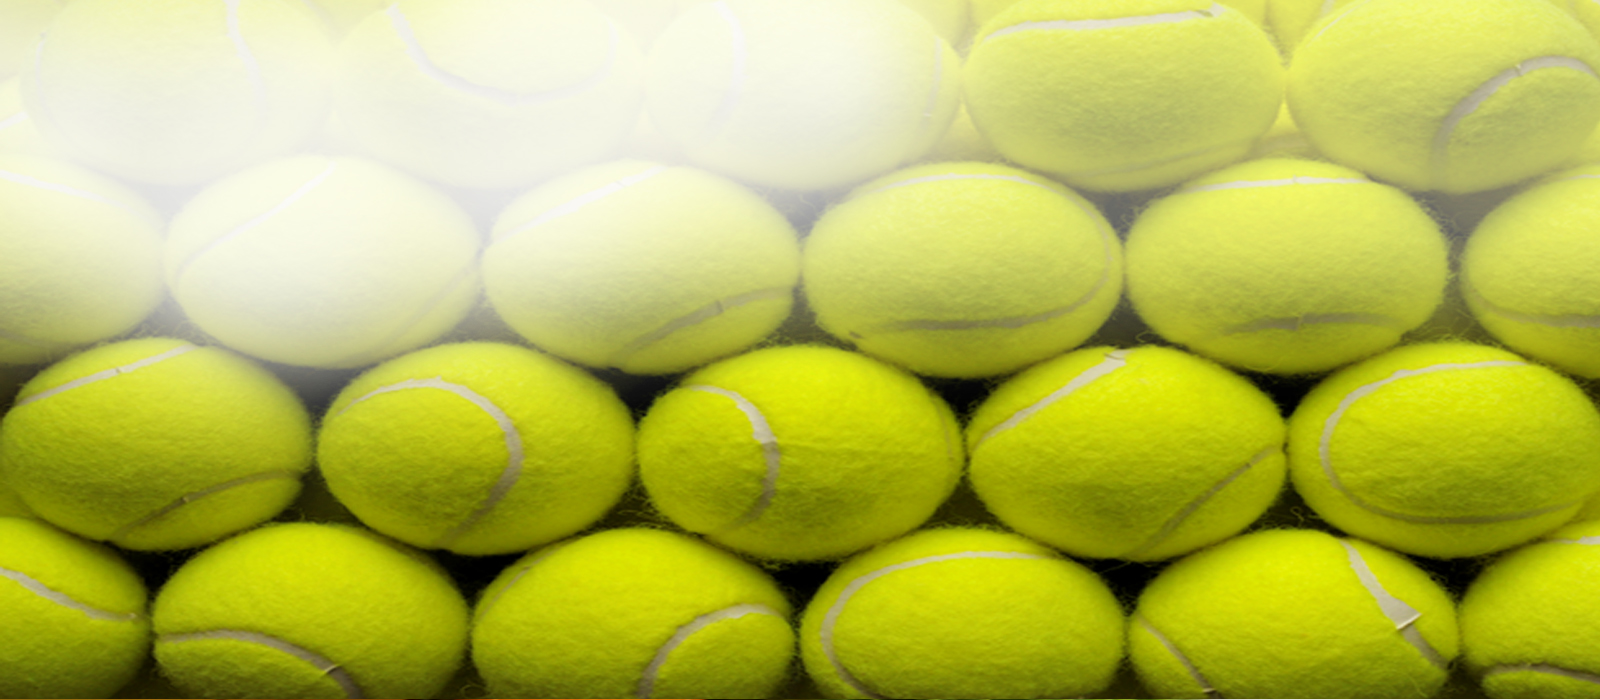 tennis balls stacked in rows